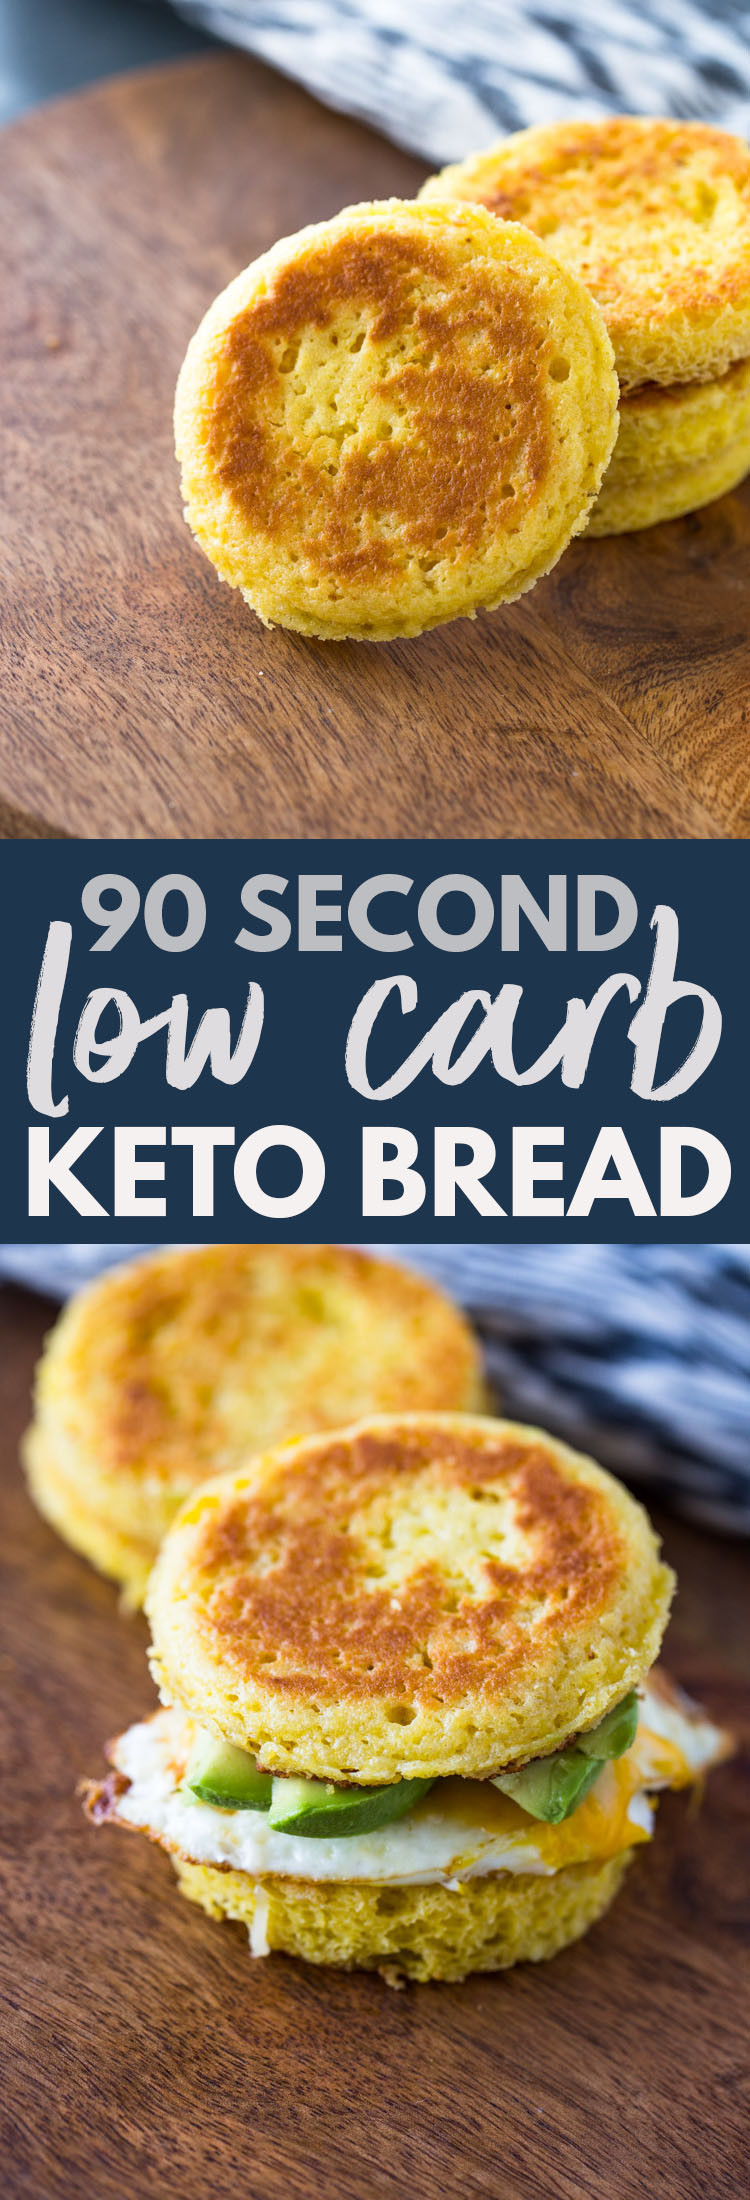 Keto Low Carb Bread
 90 Second Microwavable Low Carb Keto Bread